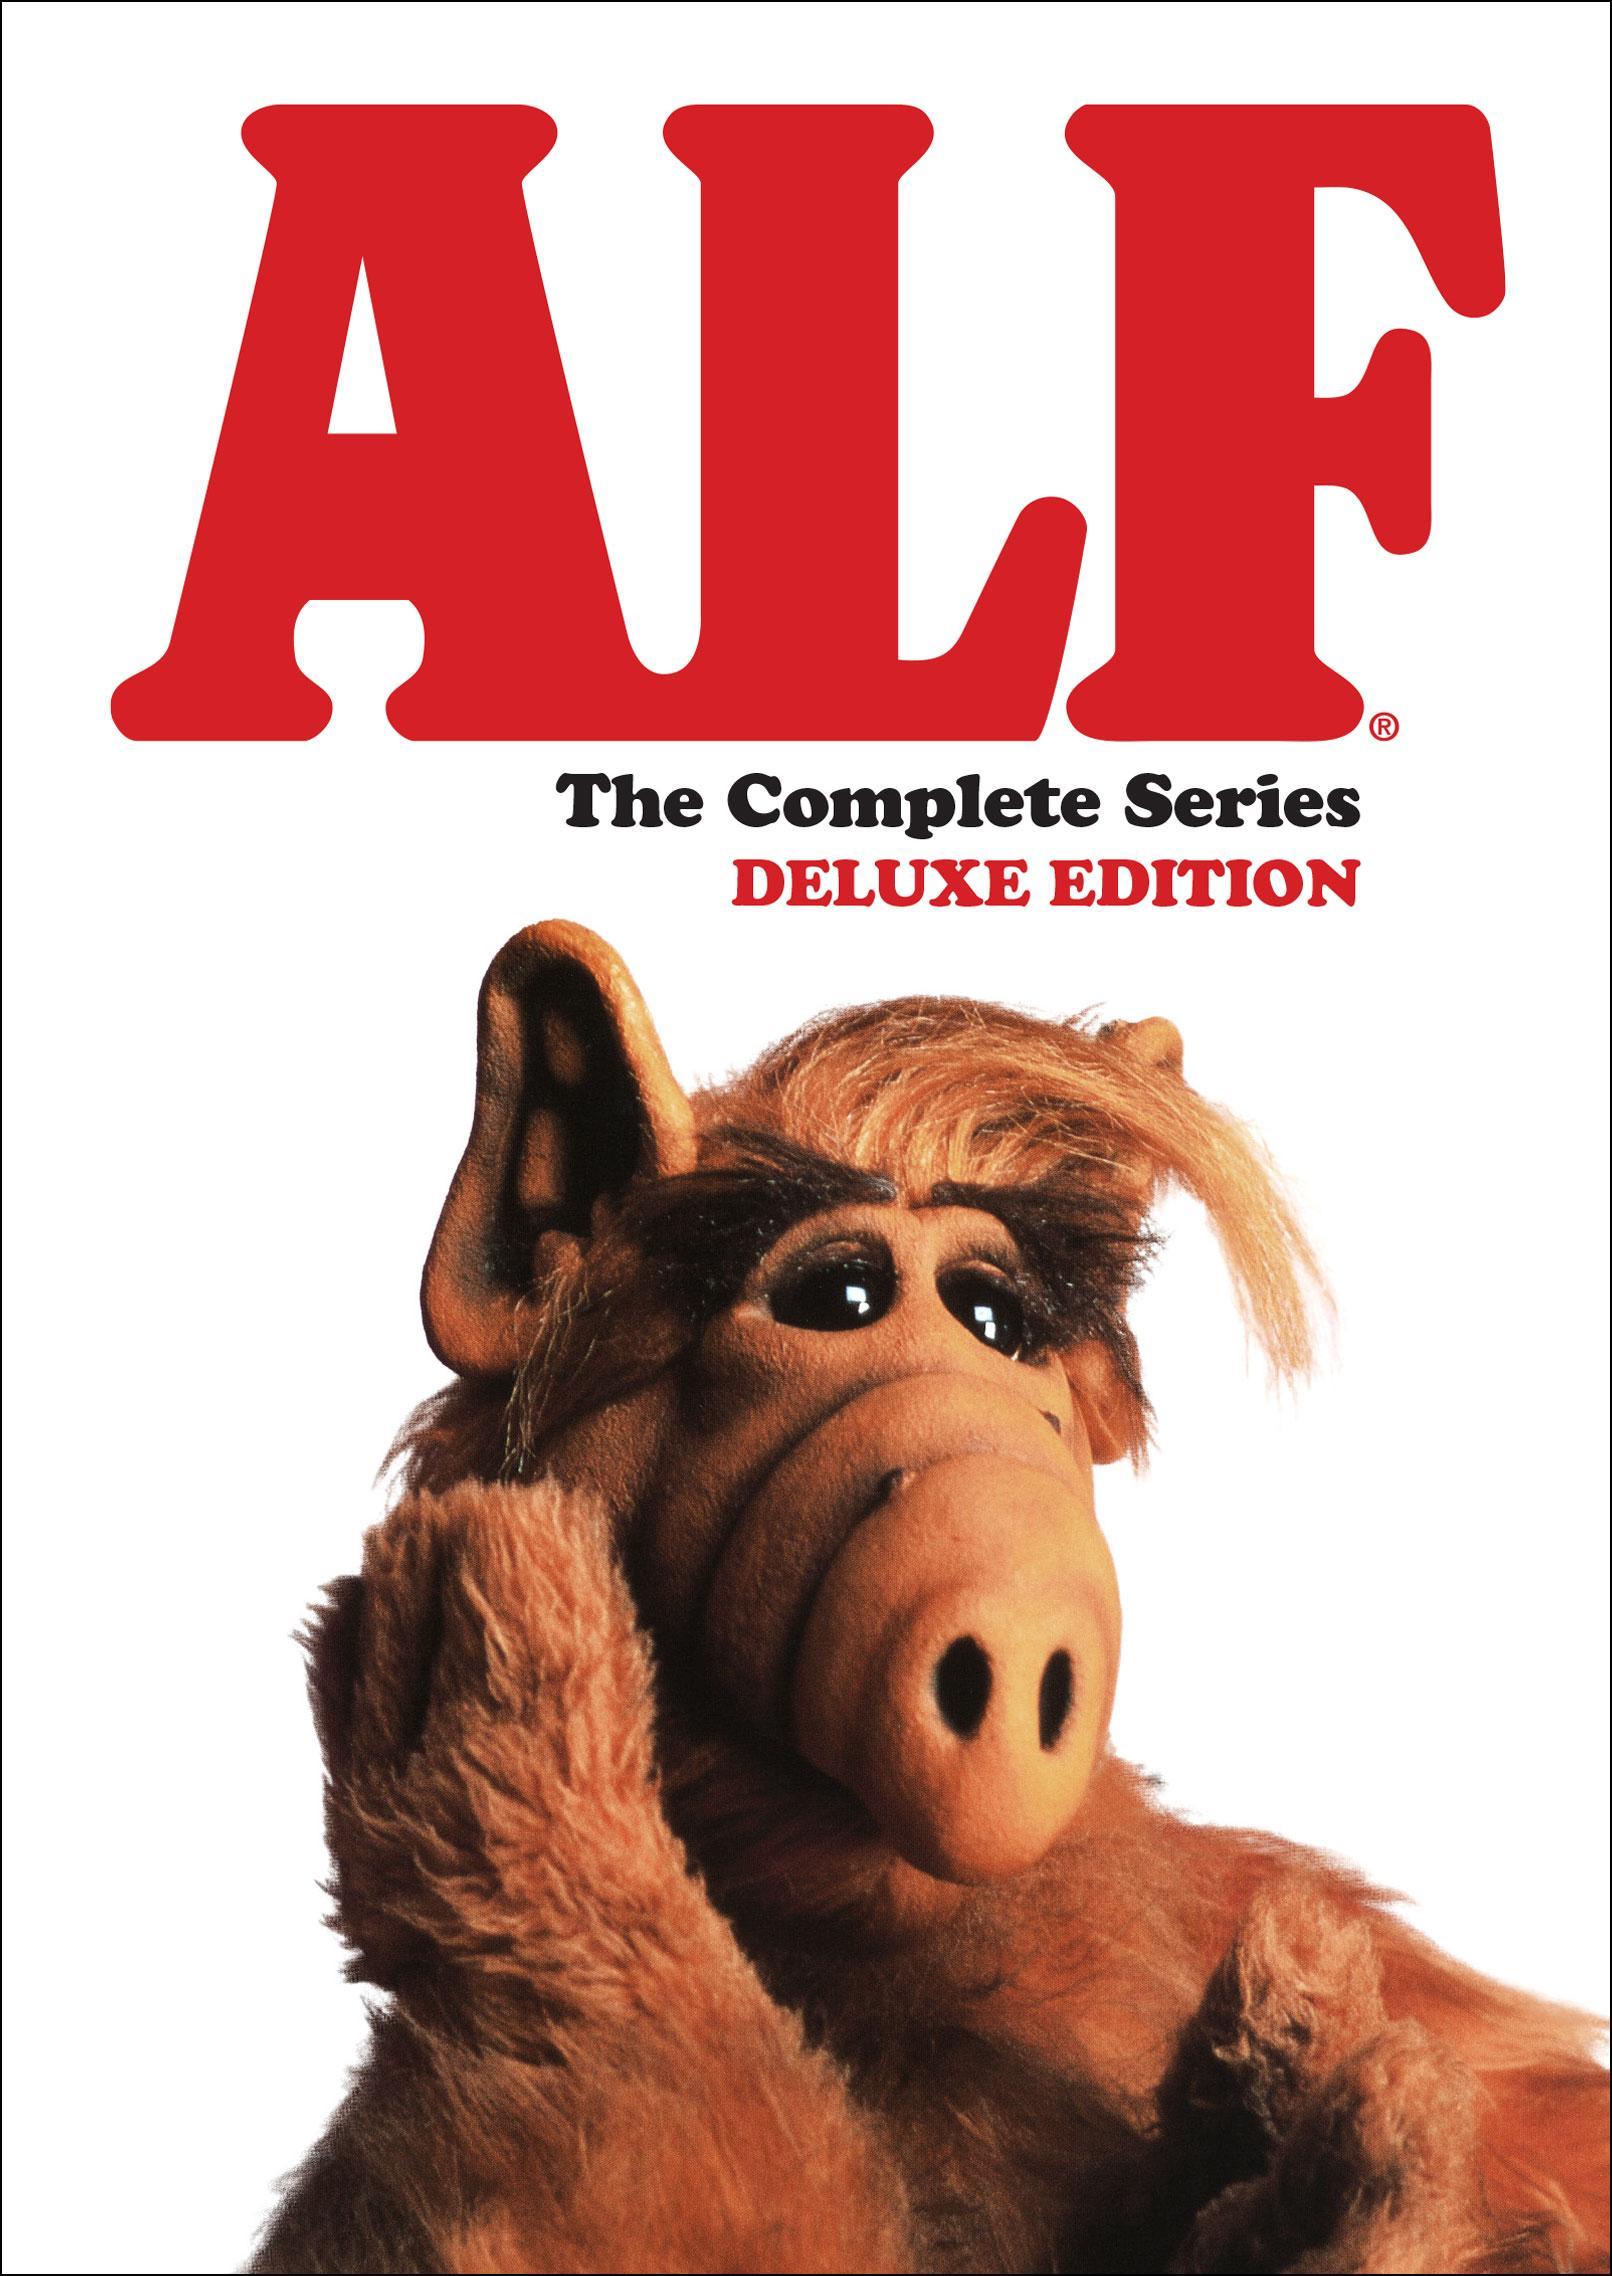 ALF: The Complete Series (Deluxe Edition) (DVD) - image 3 of 3